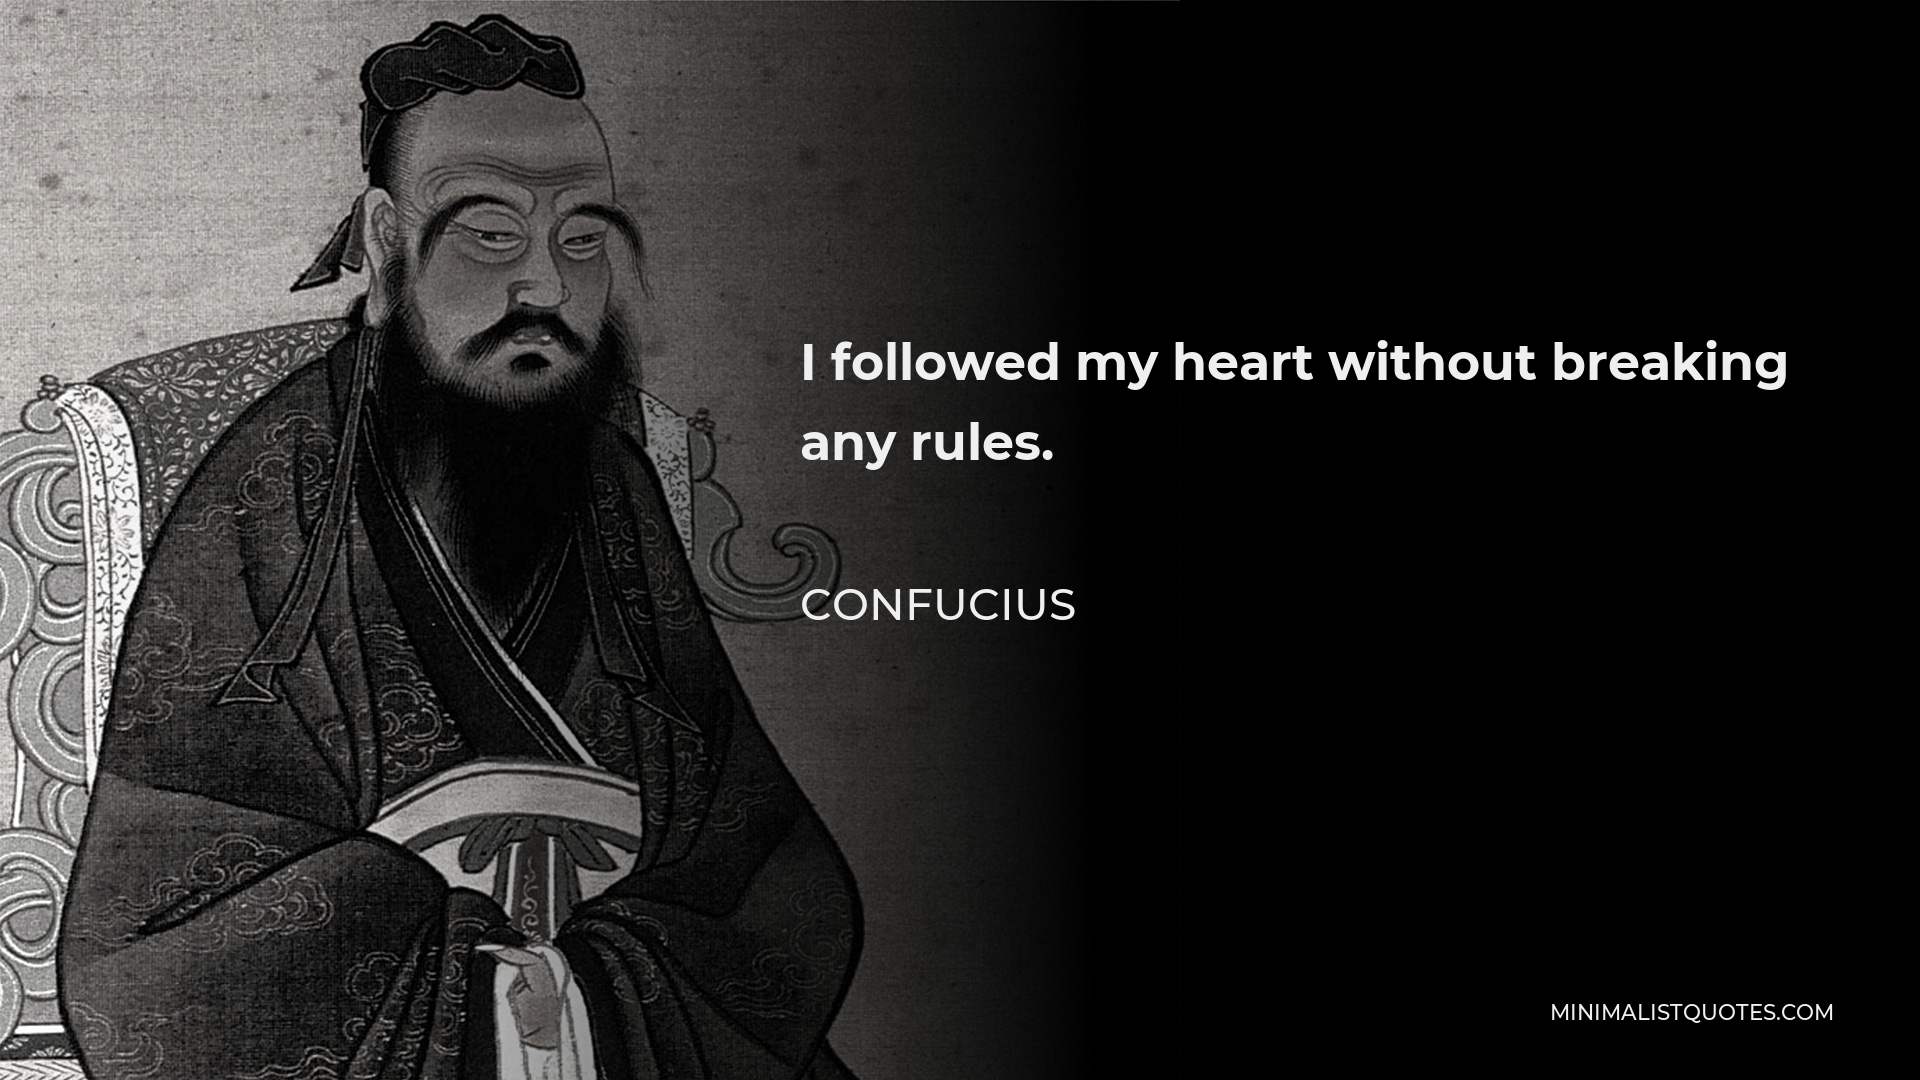 Confucius Quote - I followed my heart without breaking any rules.